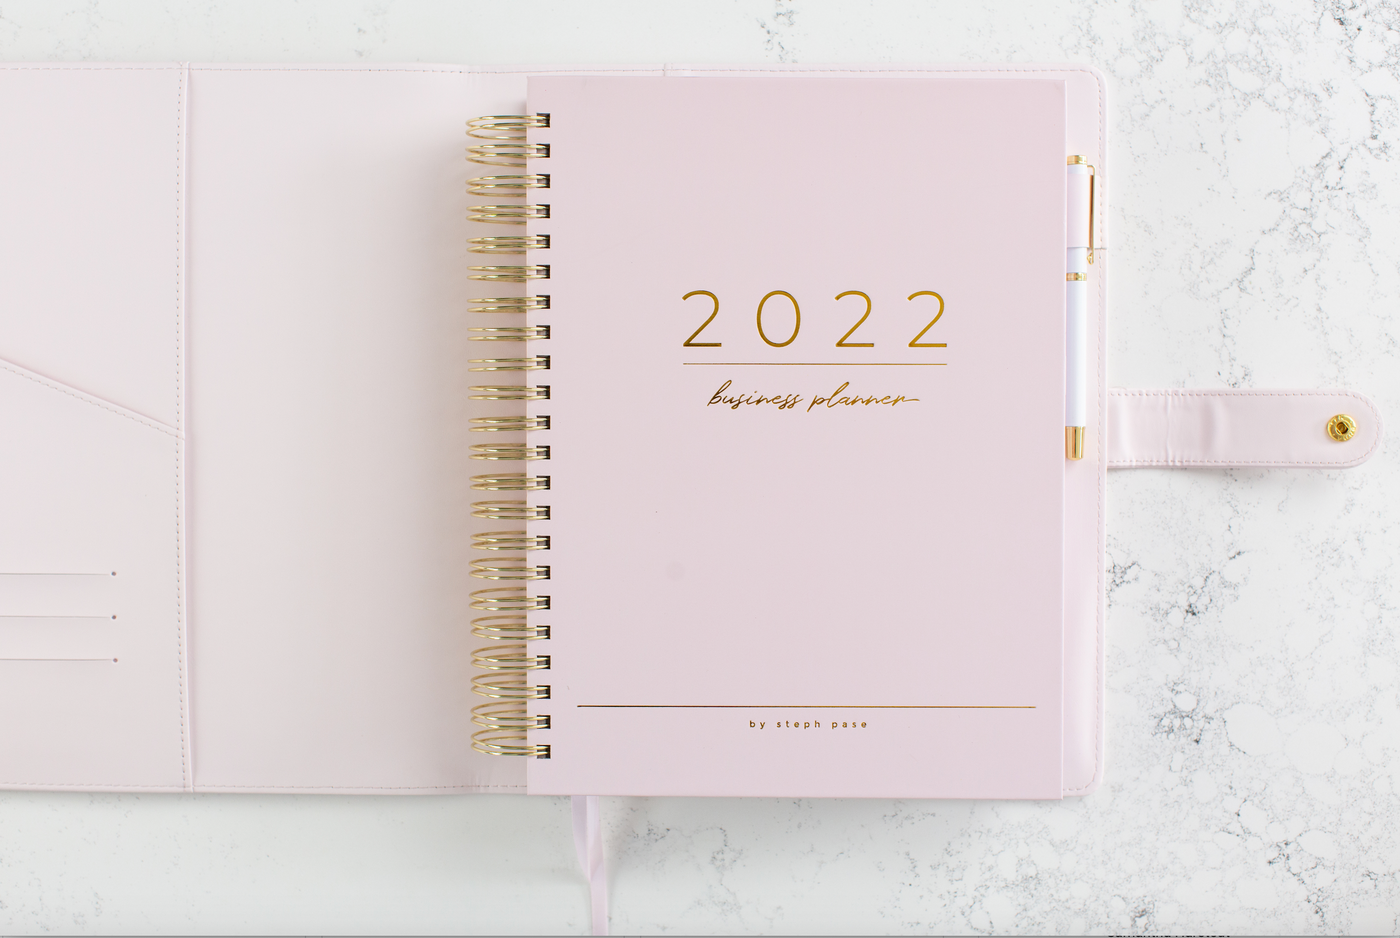 Blush Leather Planner Cover (Business & Teacher)